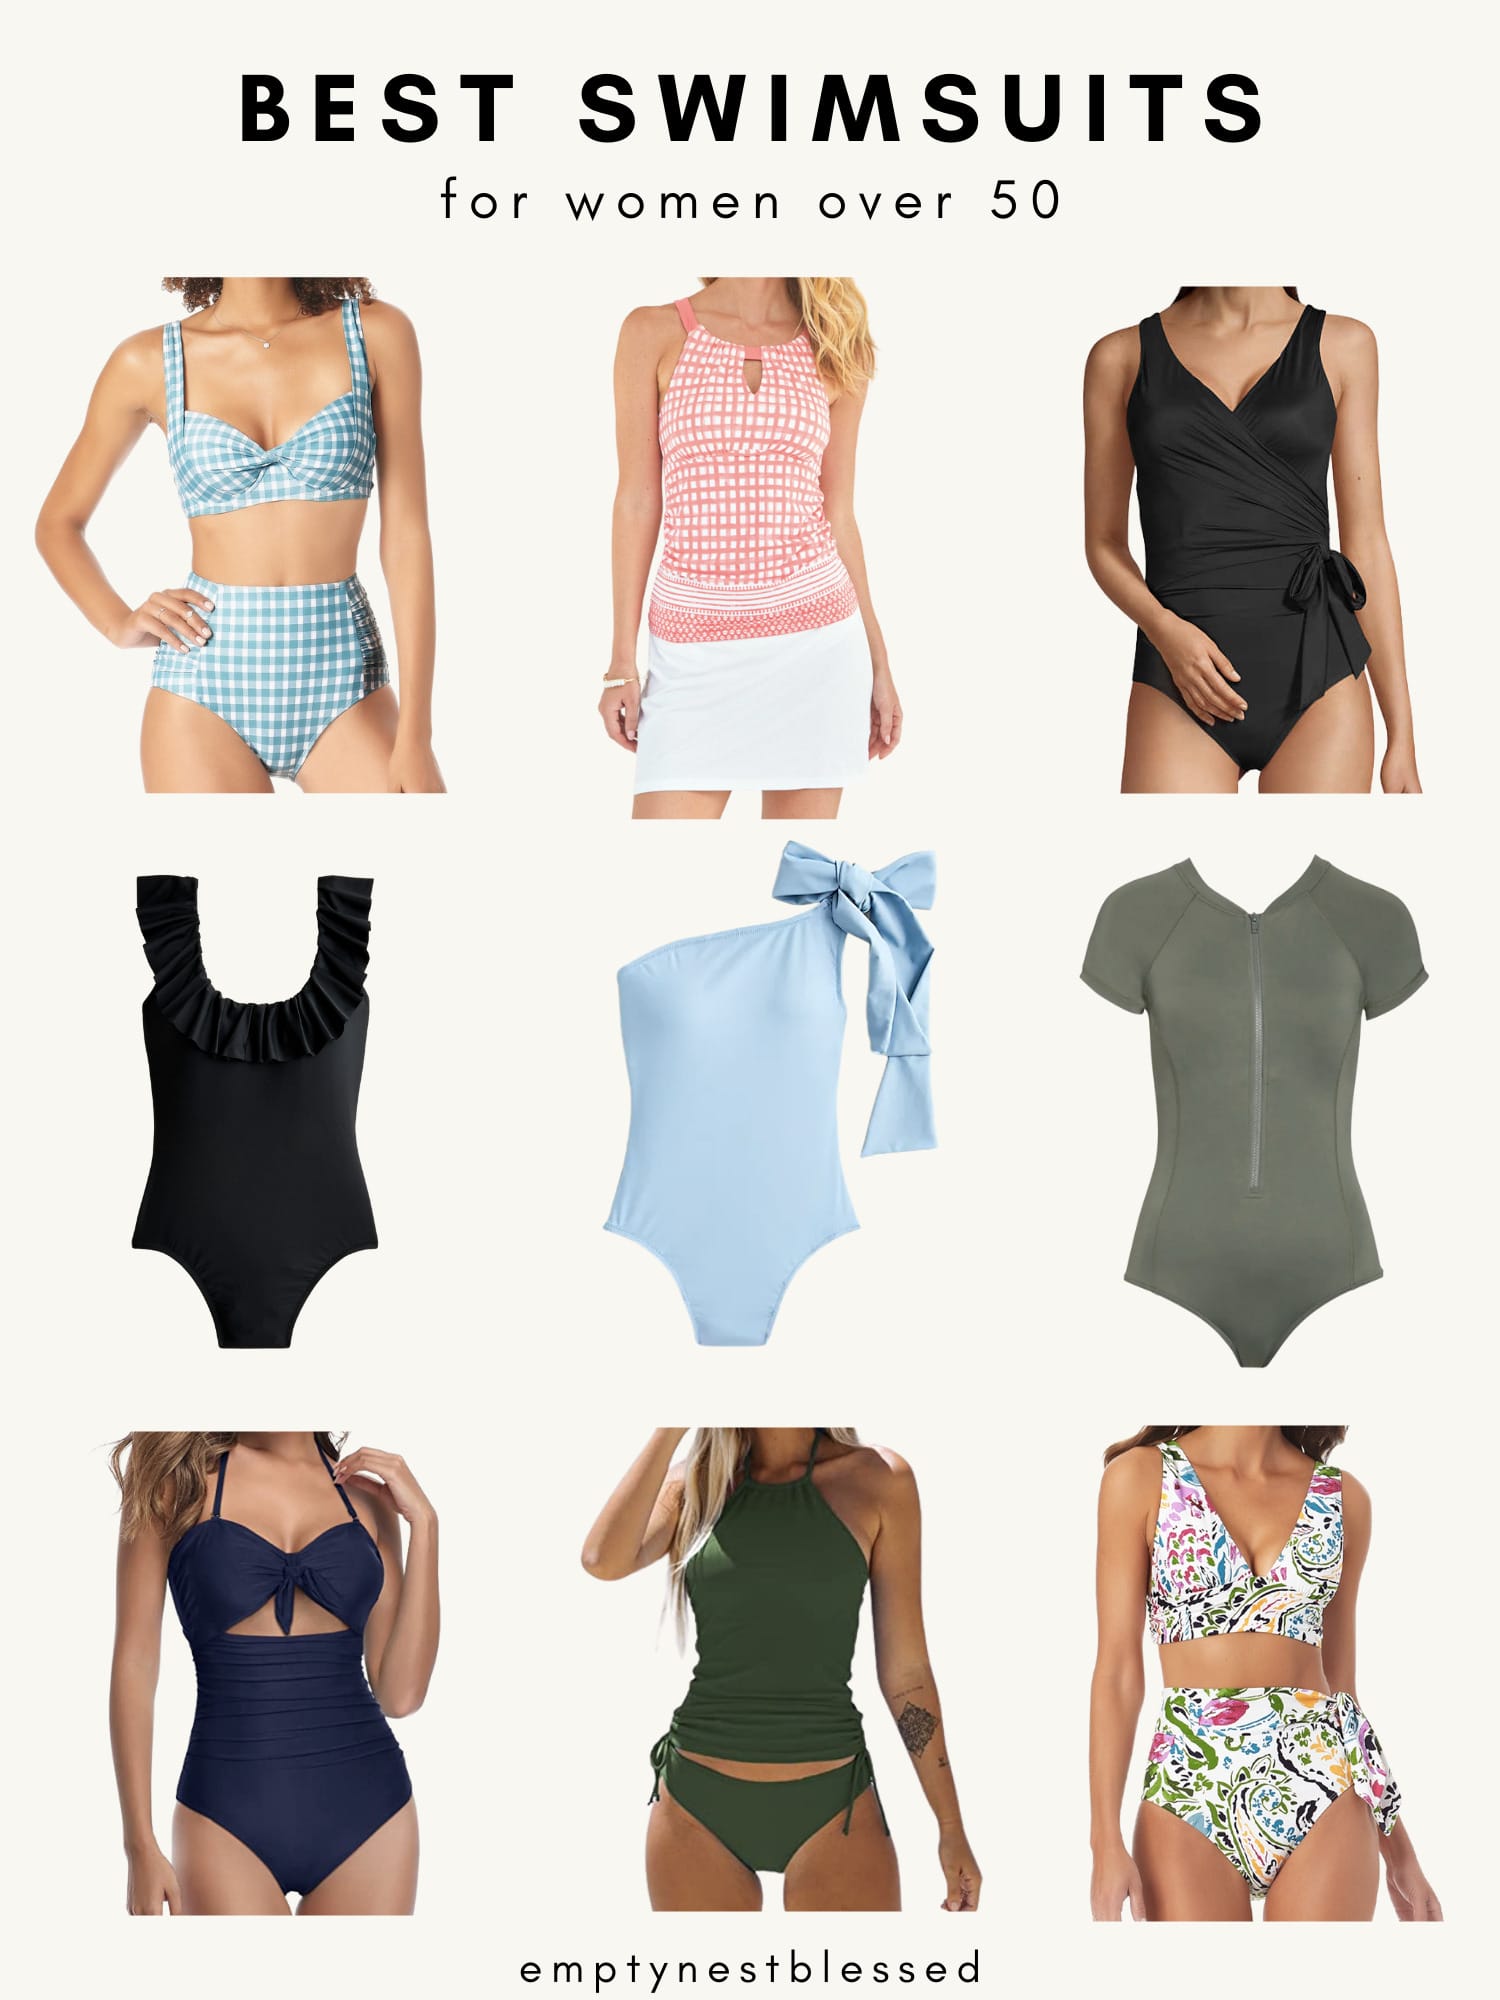 Swimwear for Women Over (or Nearing) 50: Suits for Every Body Type